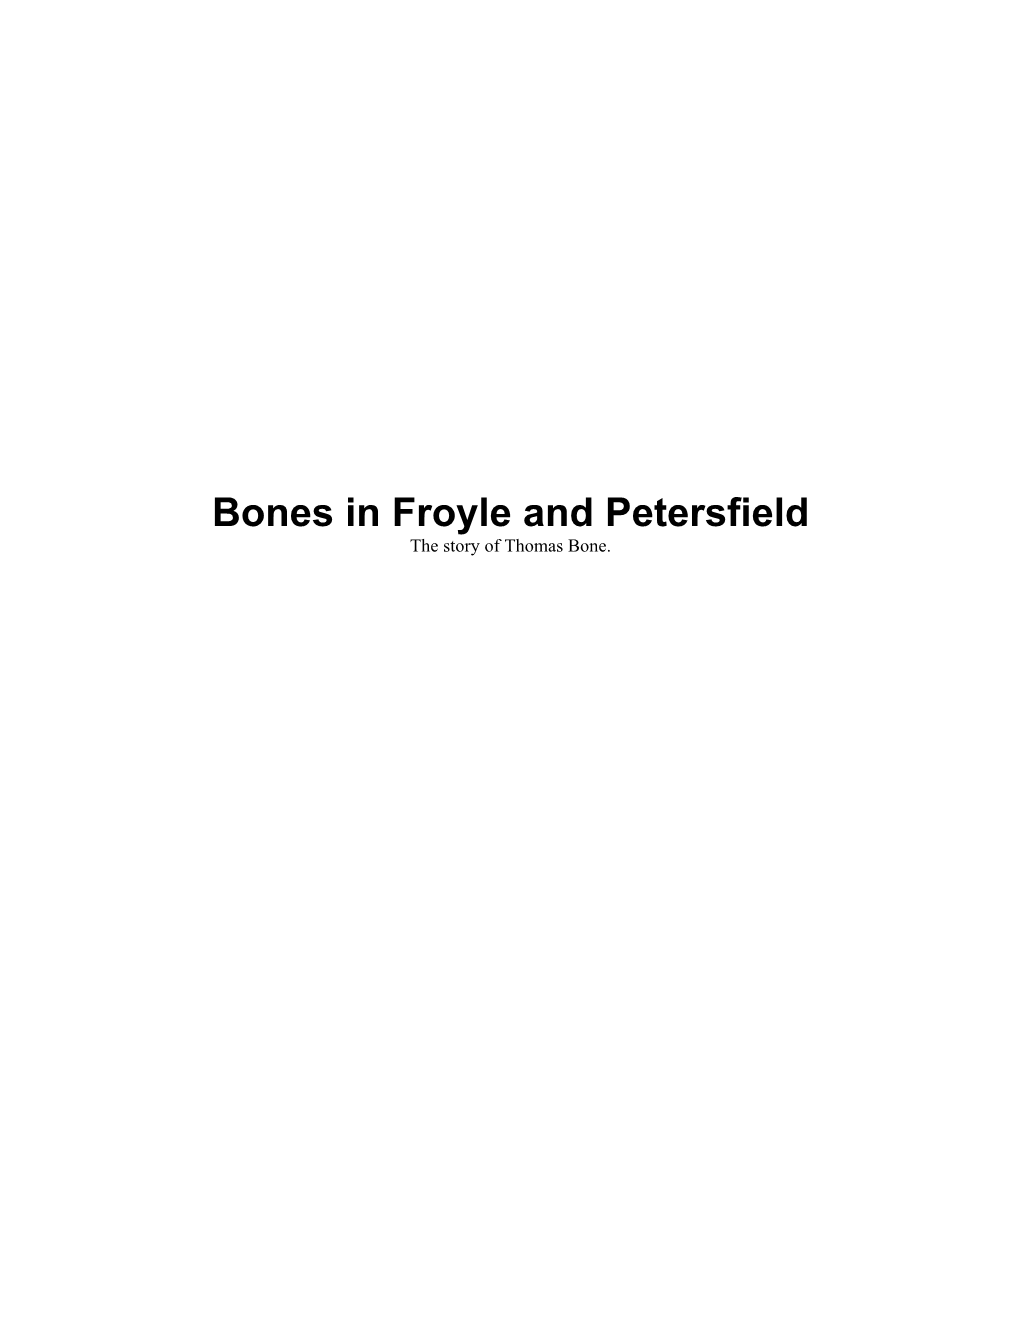 Bones in Froyle and Petersfield the Story of Thomas Bone